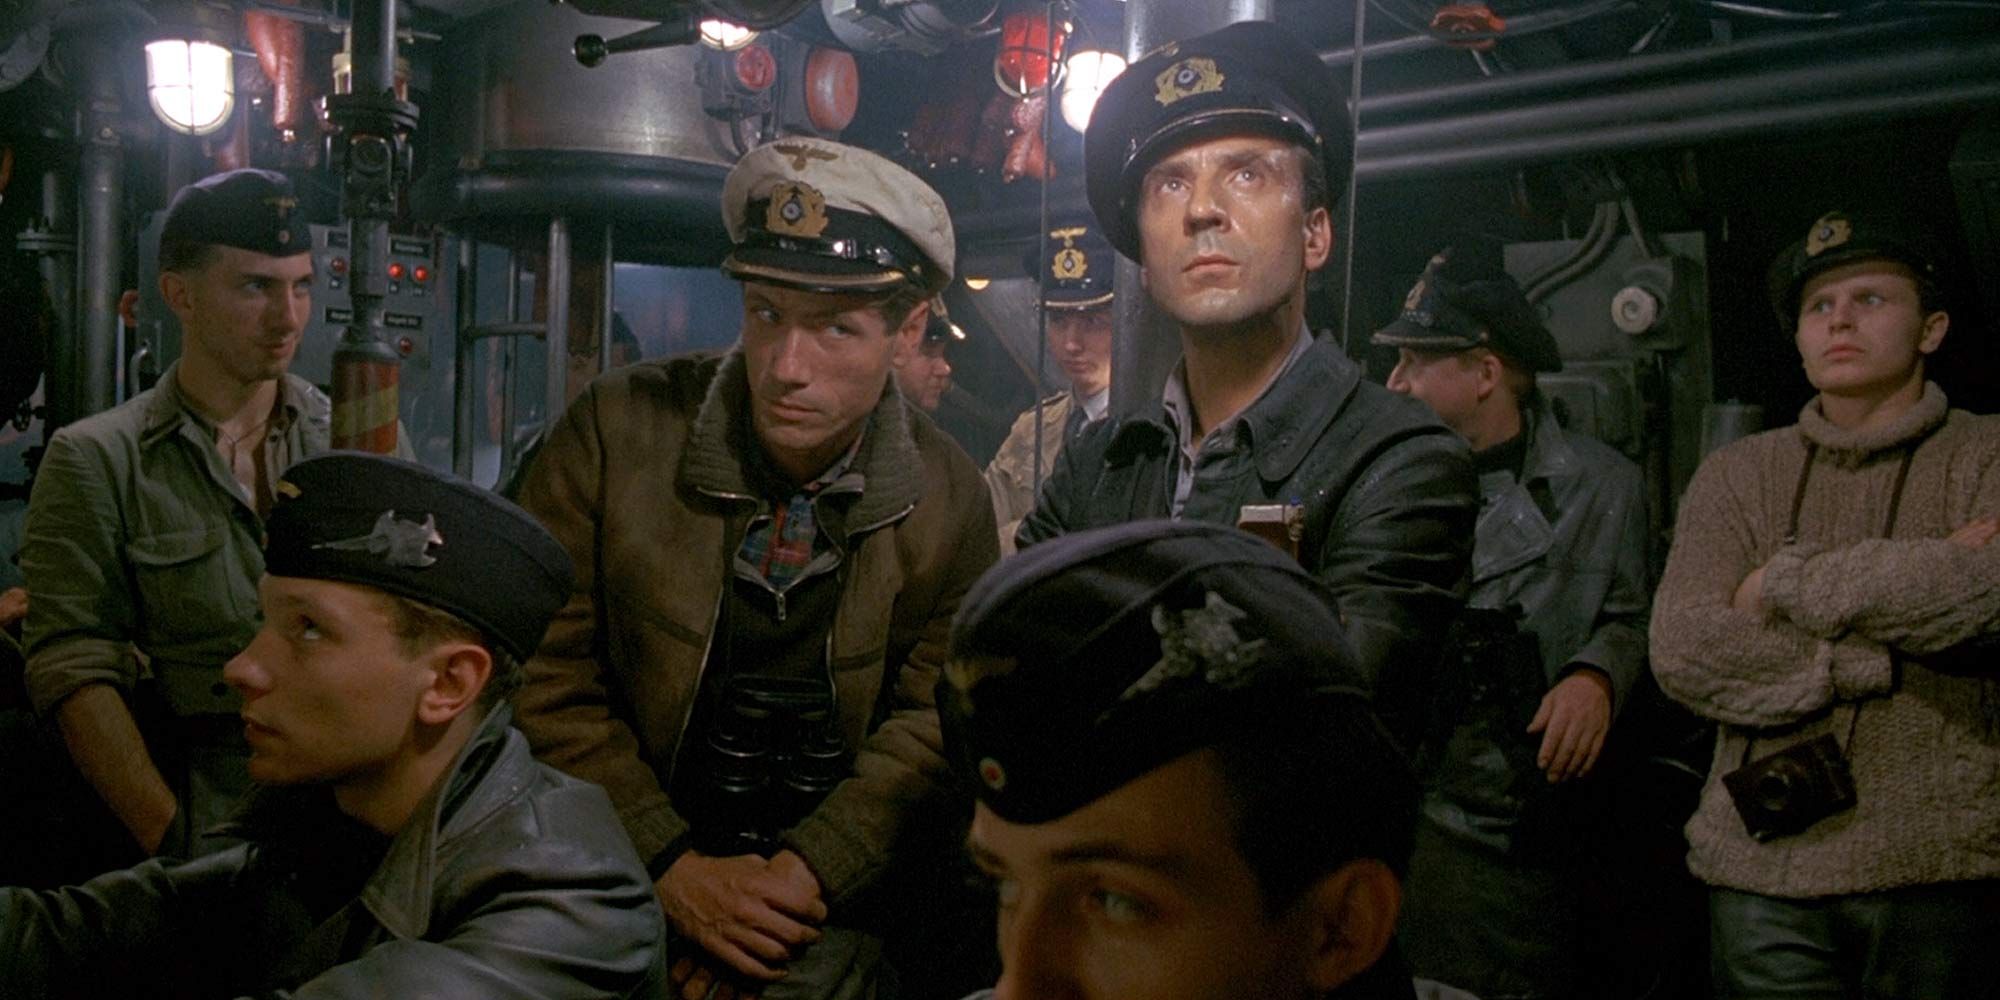 The cast of Das Boot assembled in the submarine